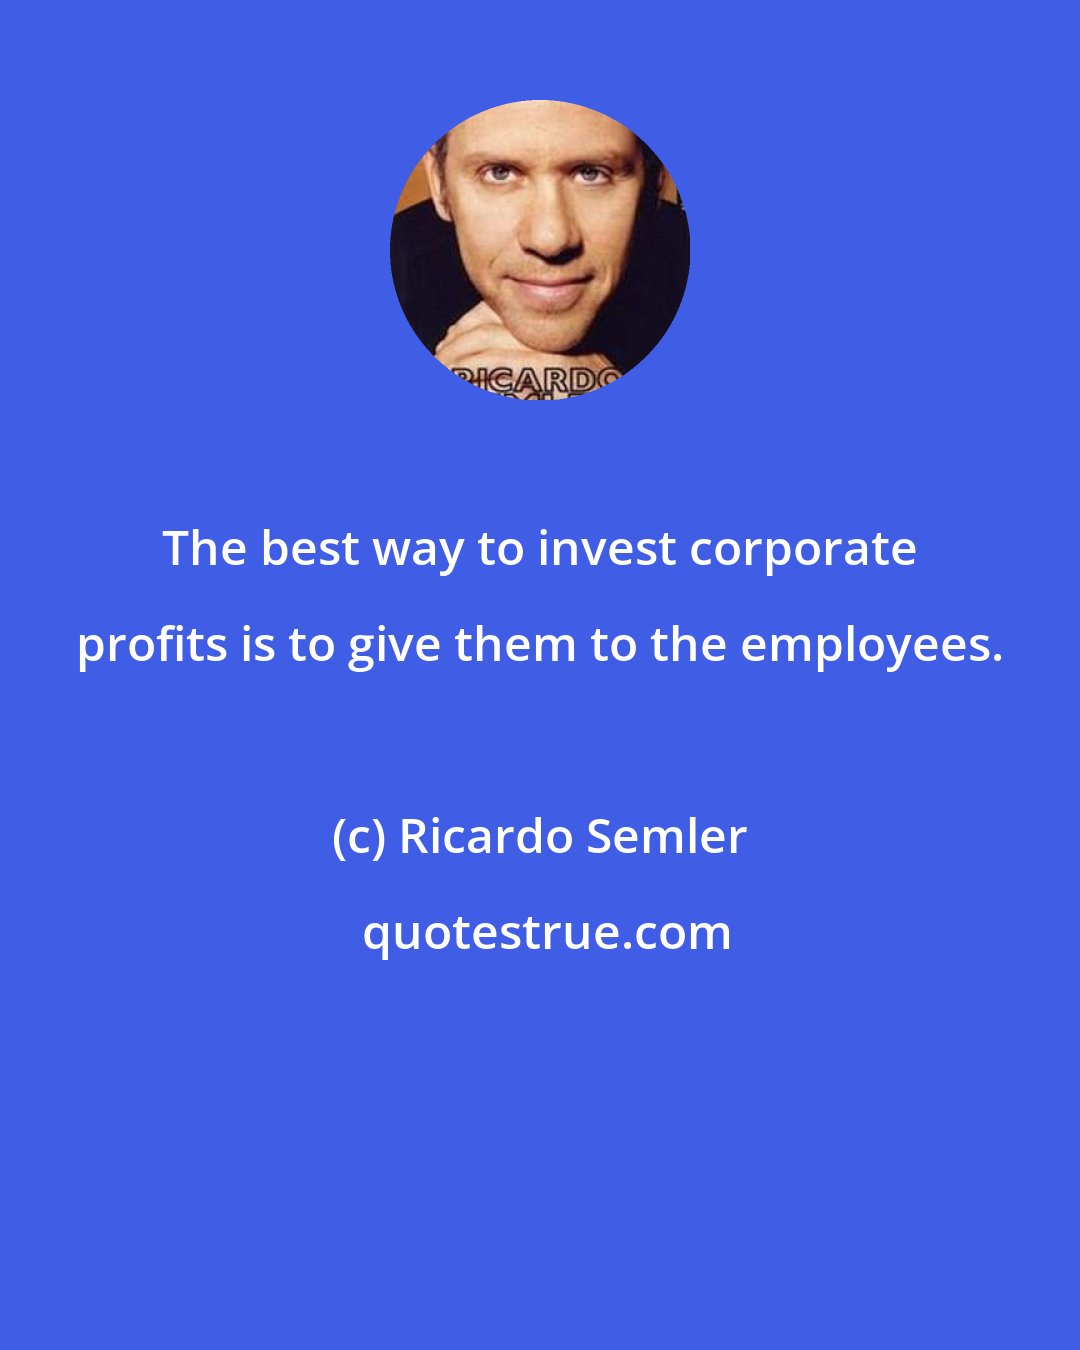 Ricardo Semler: The best way to invest corporate profits is to give them to the employees.